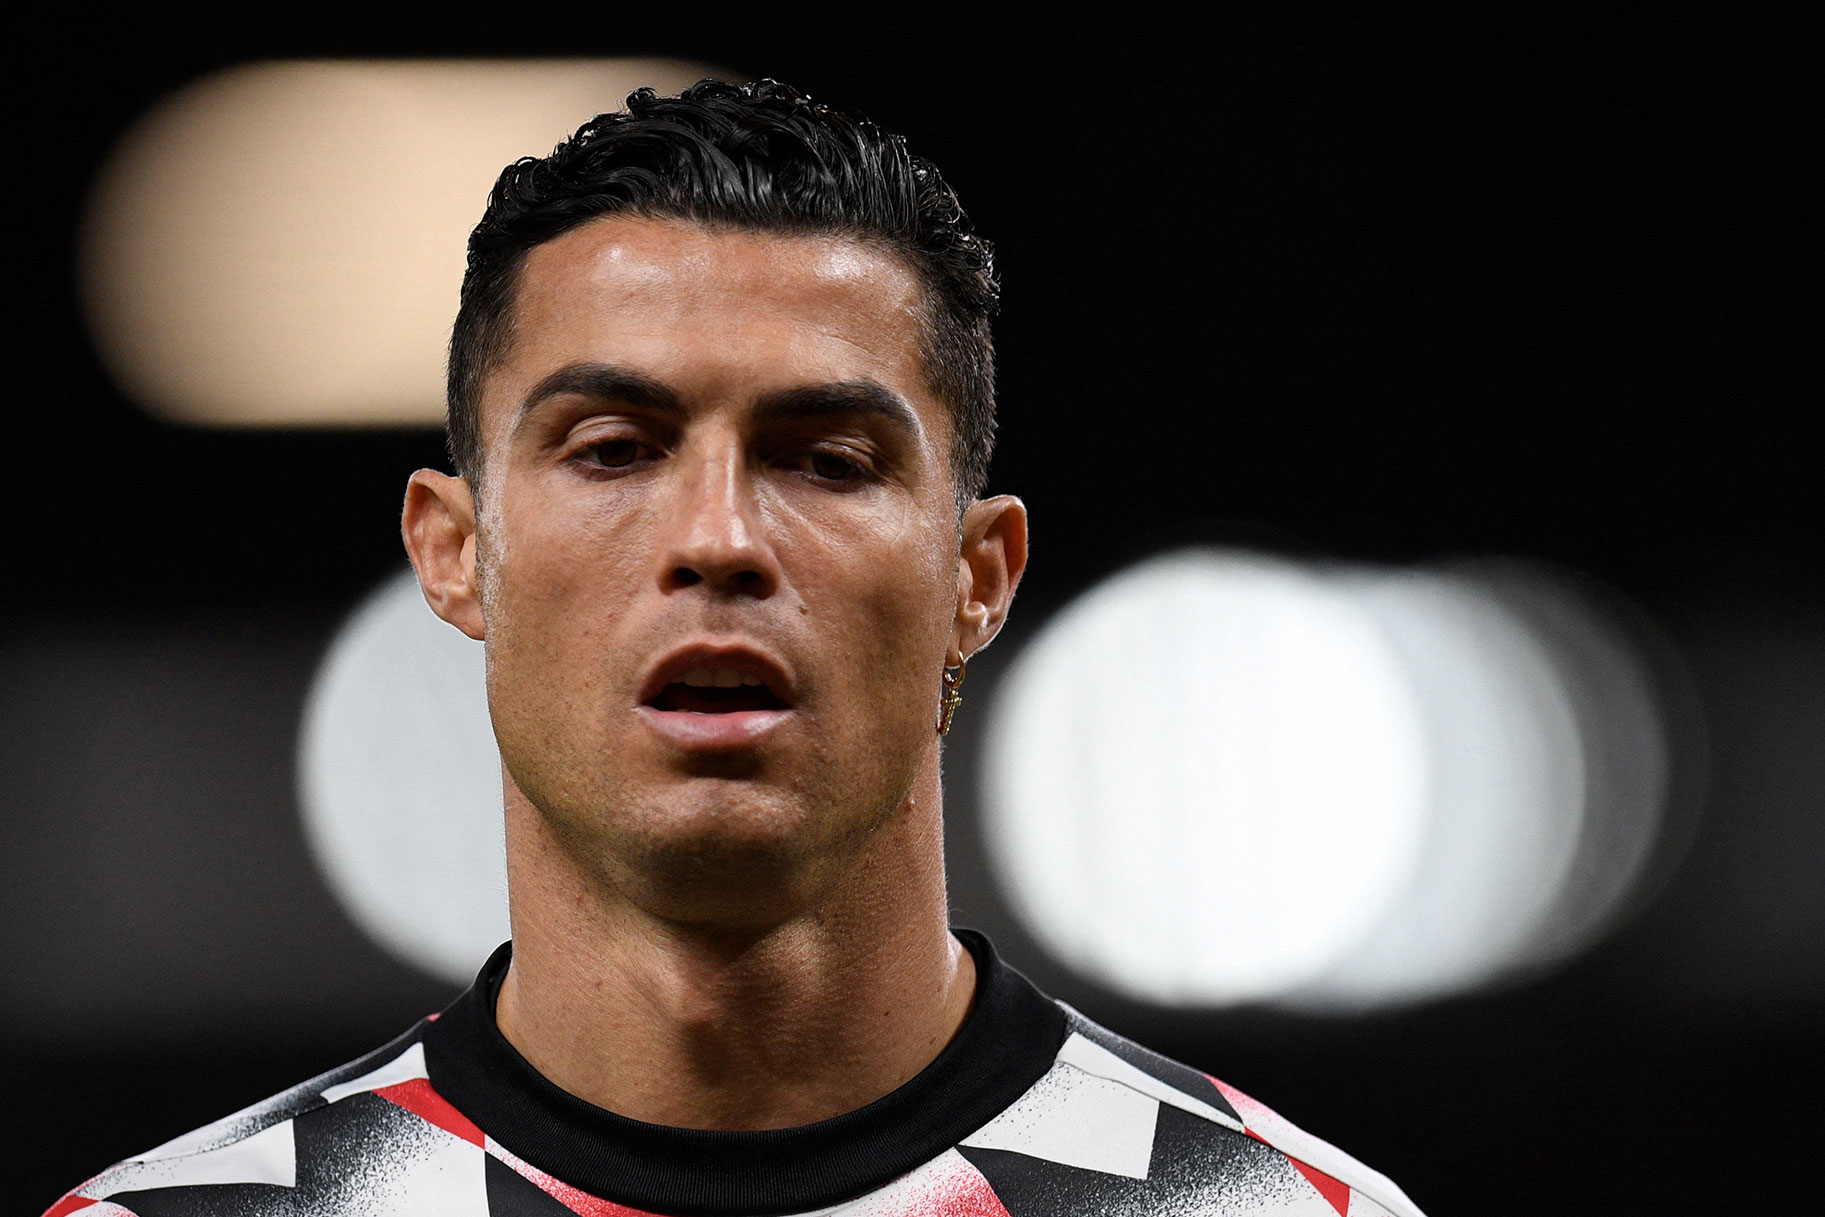 Cristiano Rinaldo reacting to something during a game